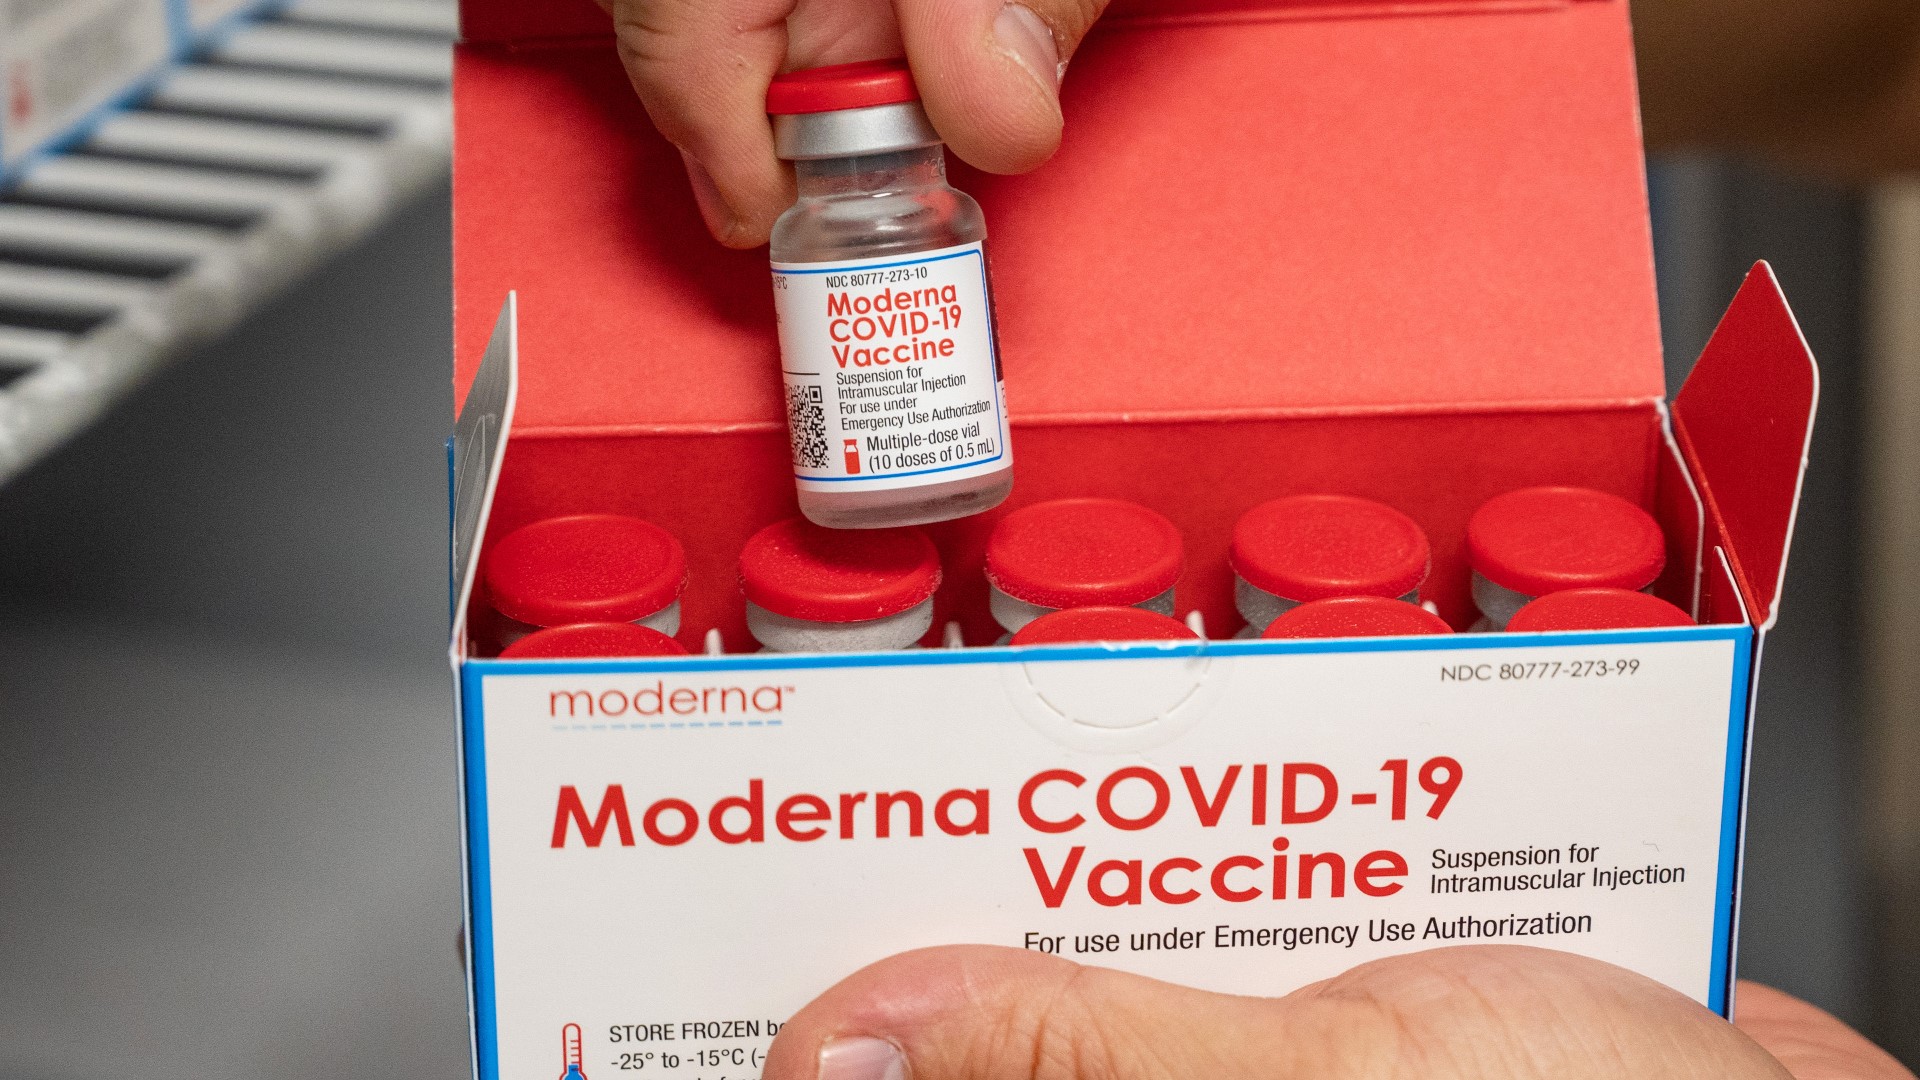 California’s Vaccine Advisory Committee held an urgent community meeting to discuss late-breaking coronavirus vaccination recommendations from the government.